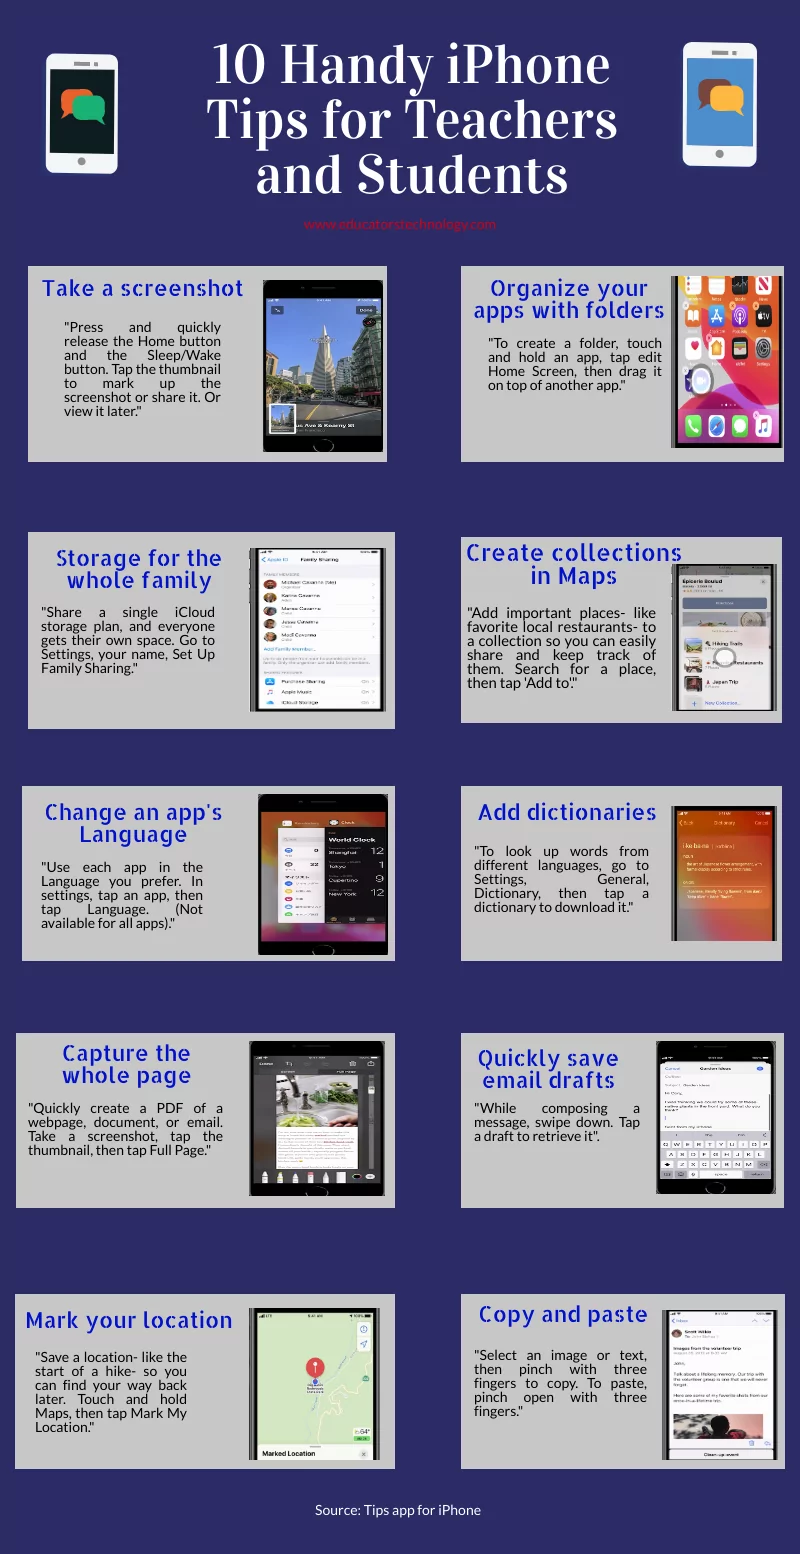 10 Handy iPhone Tips for Teachers and Students